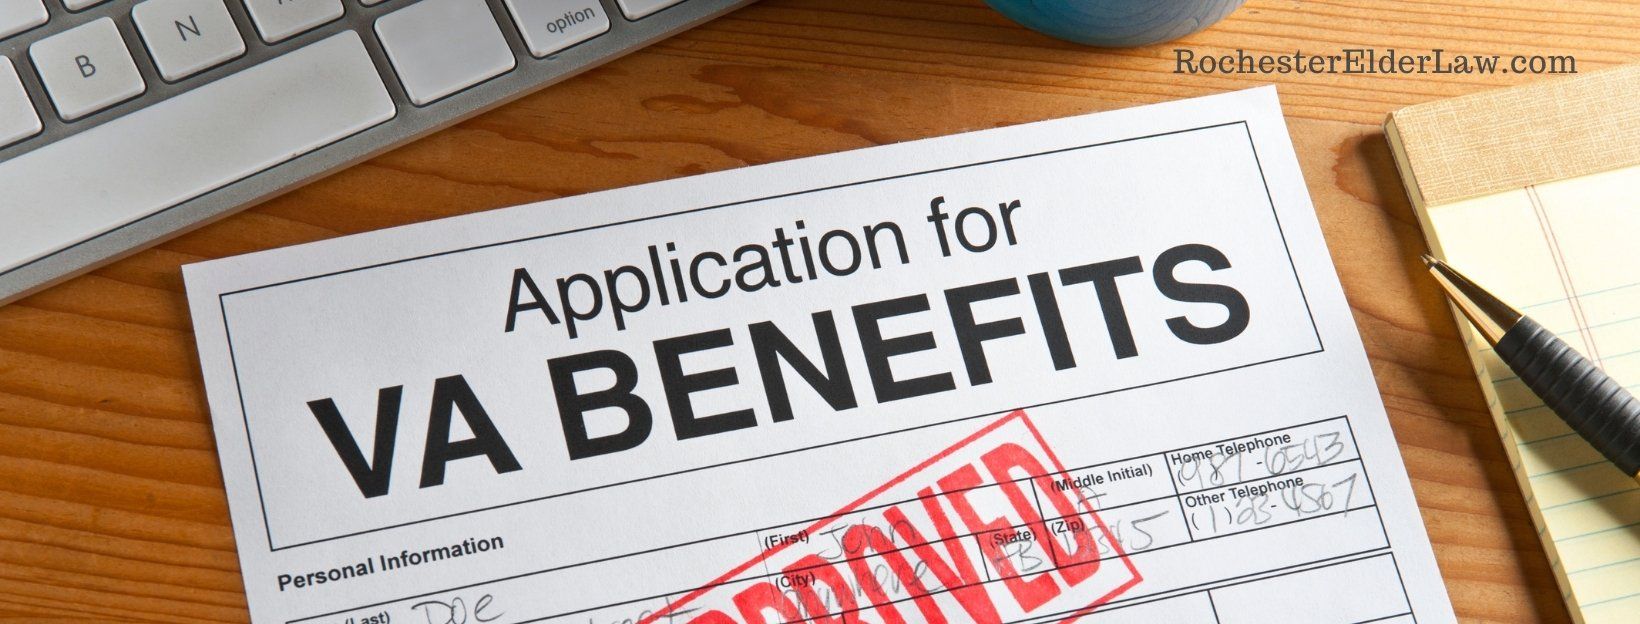 VA Benefits and Long Term Care Planning